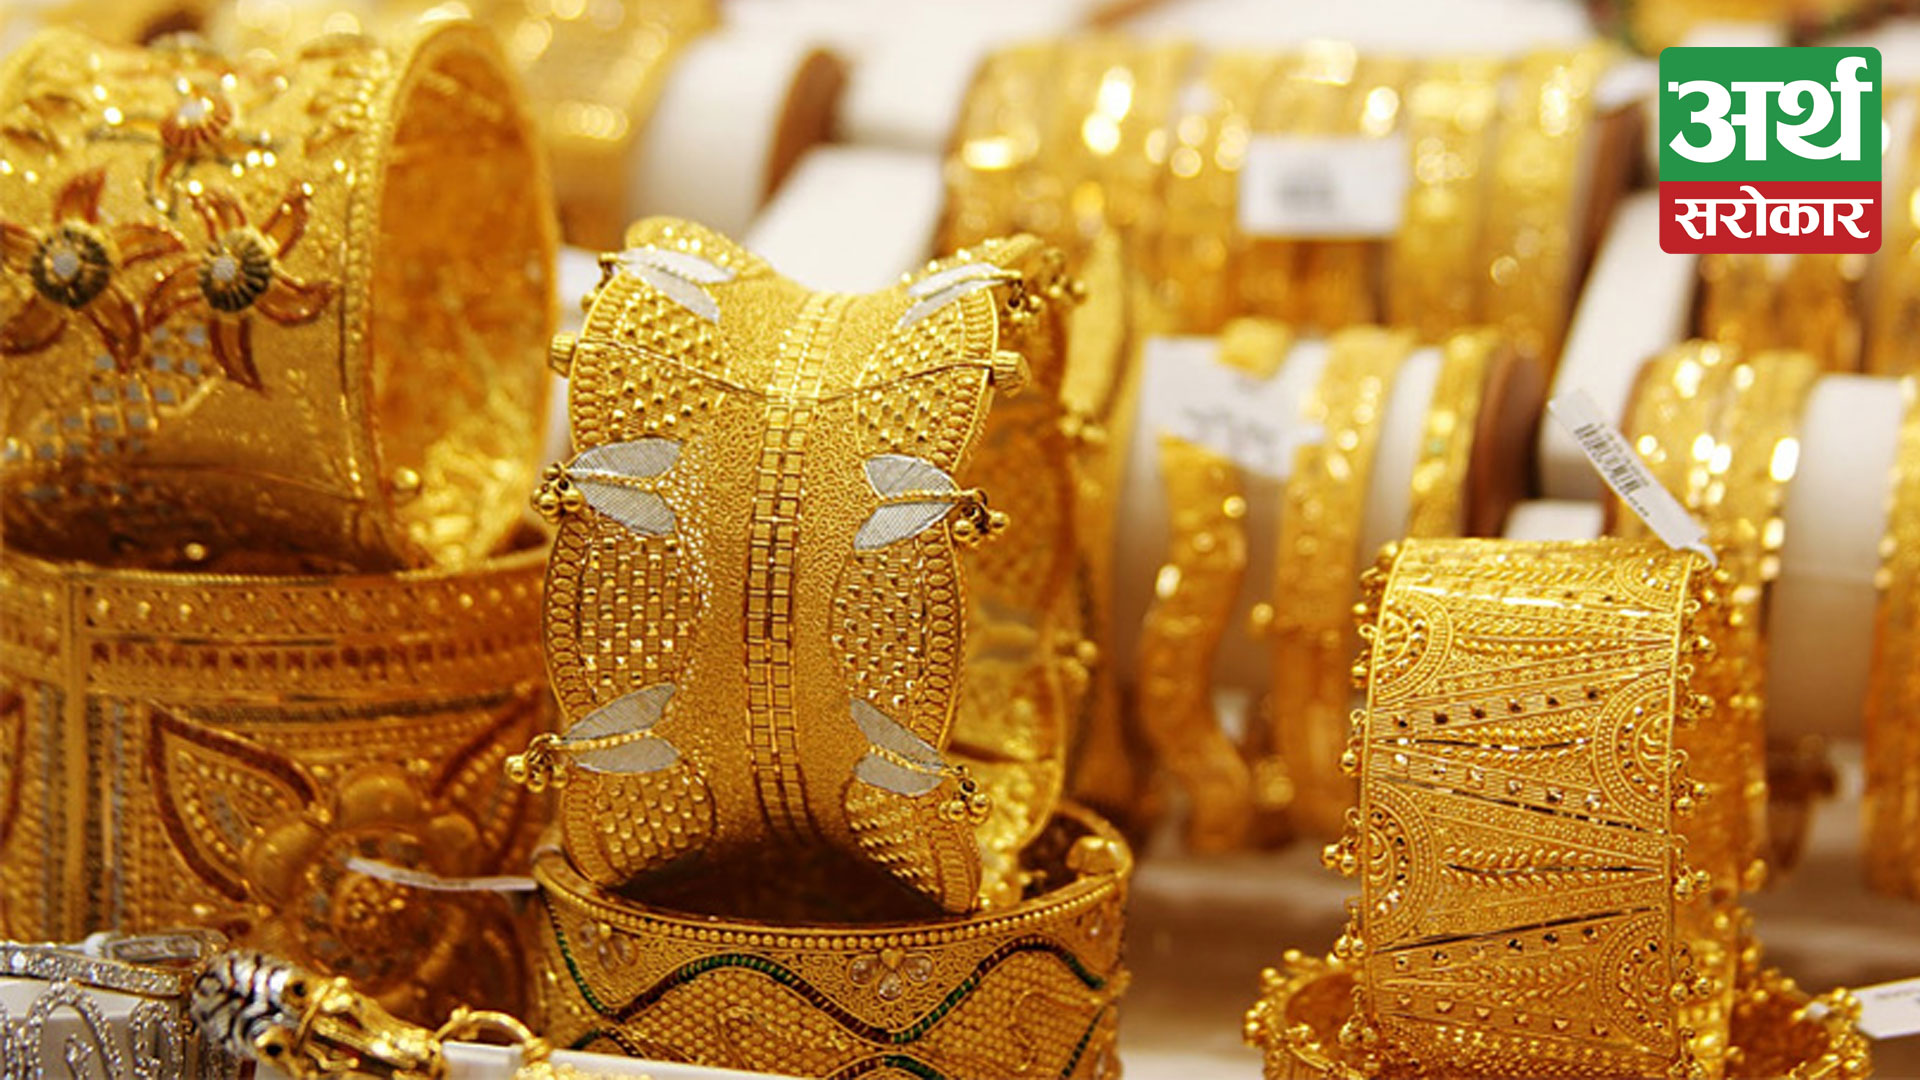 Gold price increased by 1,500 on Tuesday